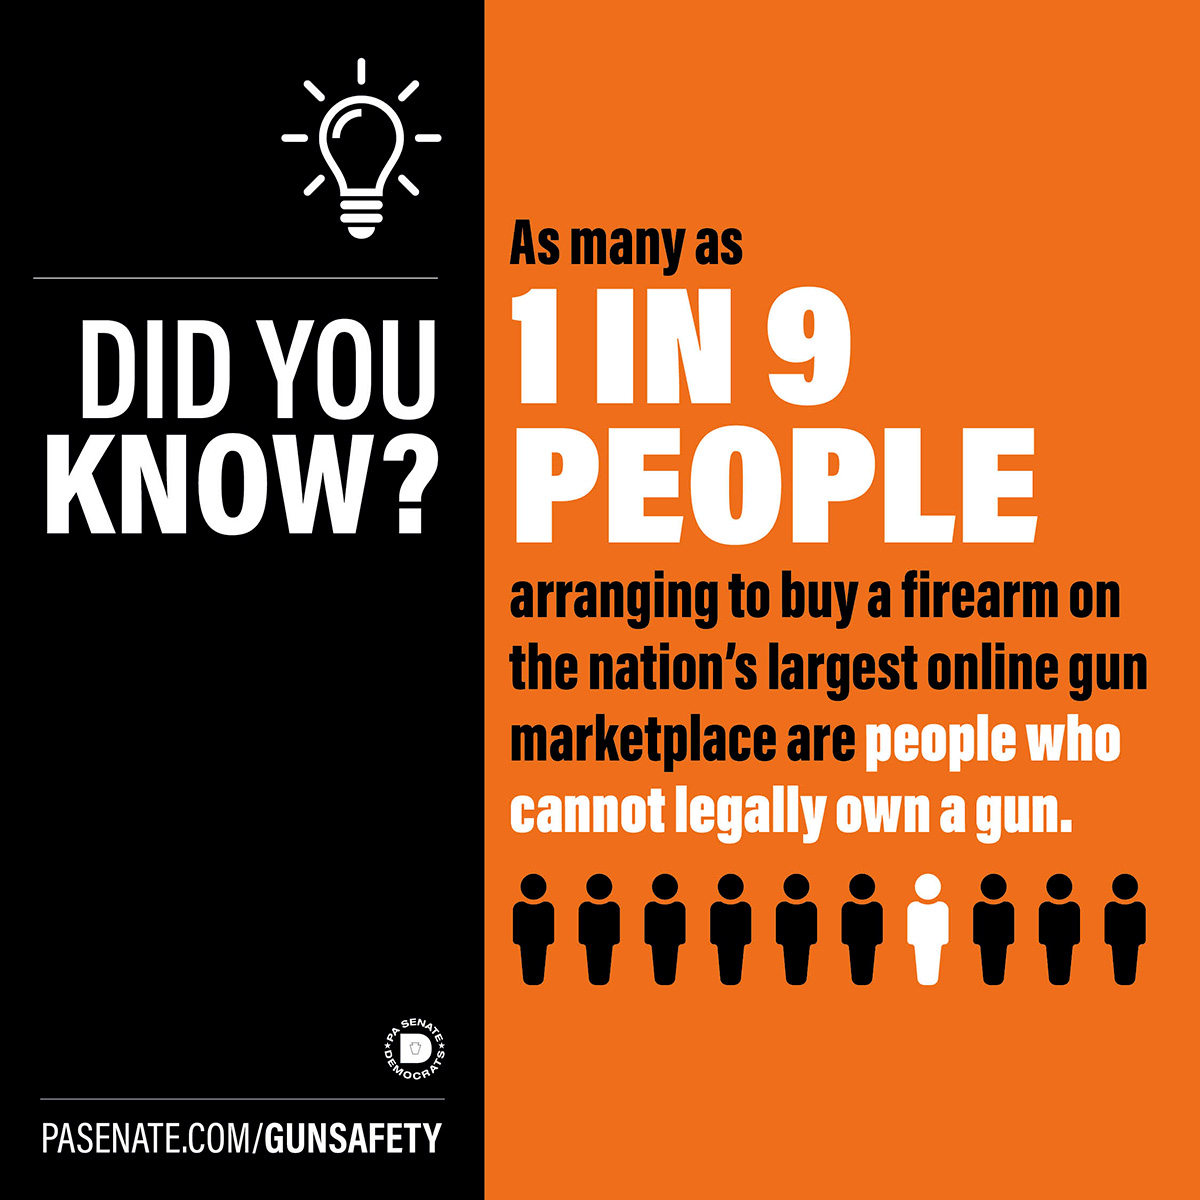 Did you know? As many as 1 in 9 arranging to buy a firearm on the nation's largest online gun marketplace are people who cannot legally own a gun.